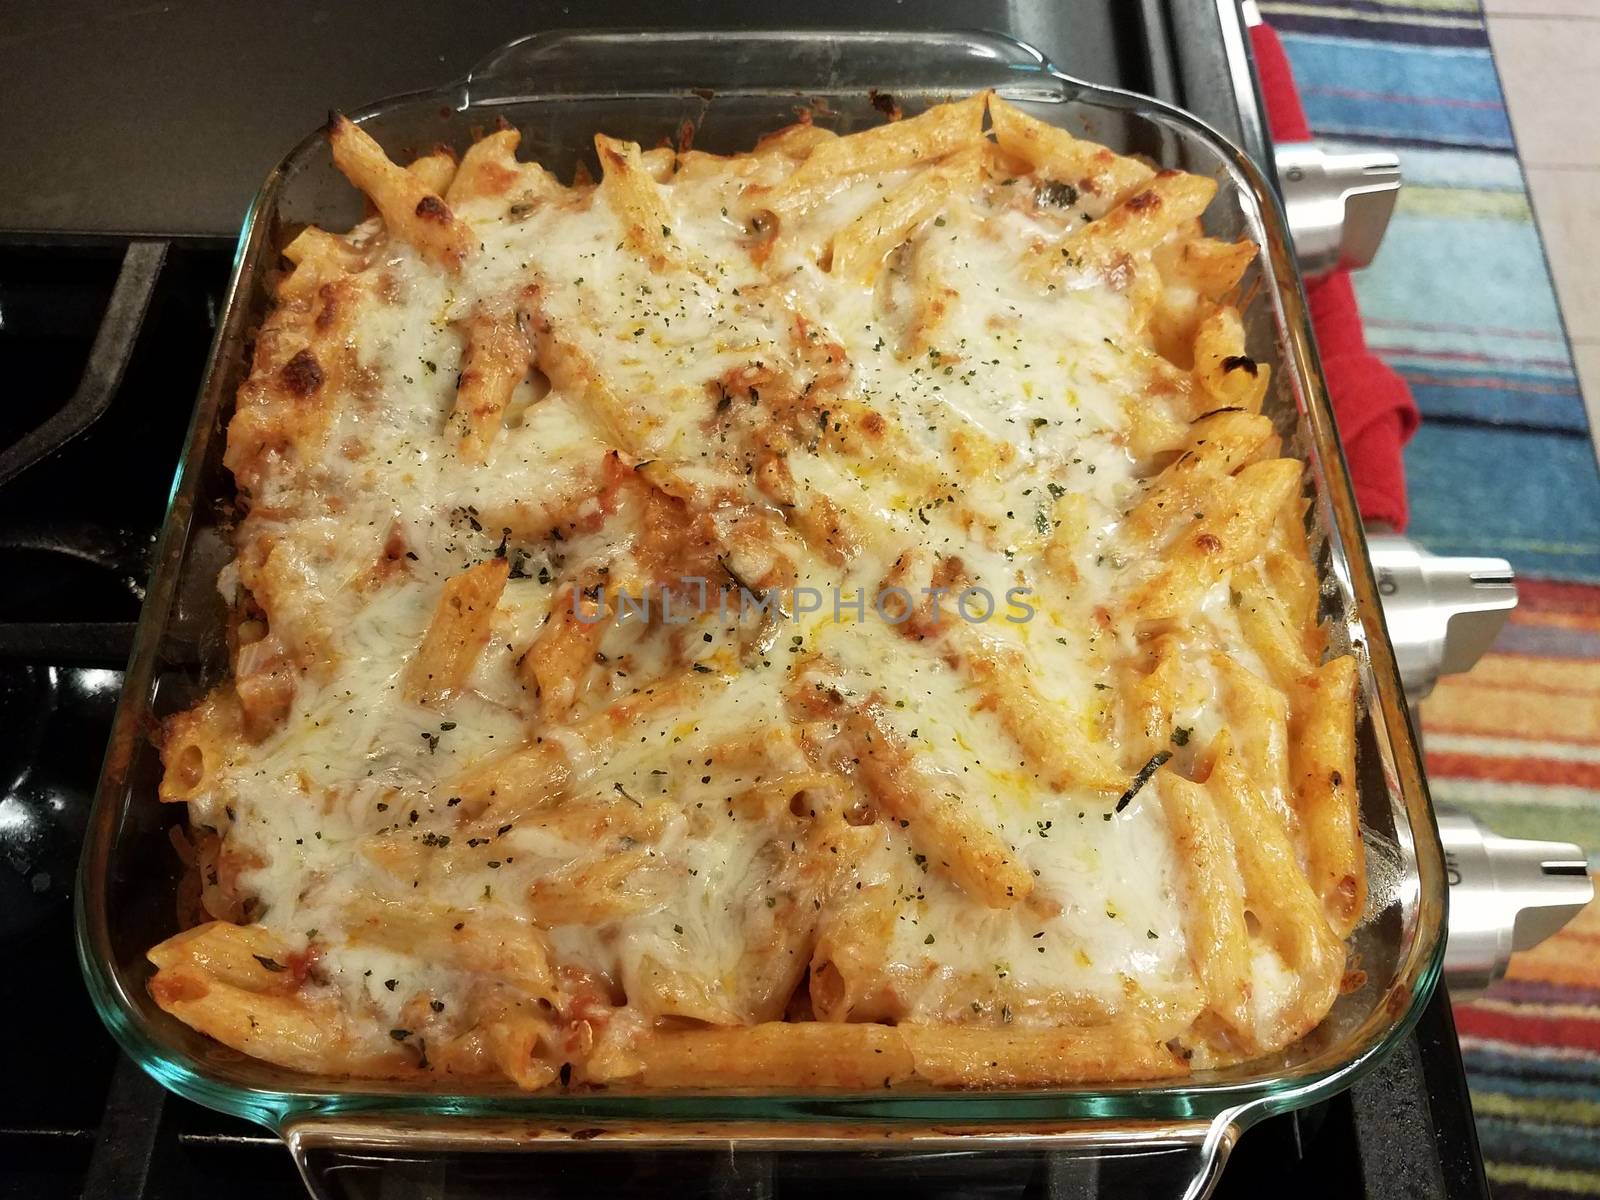 baked hot cheesy penne pasta in glass container on stove